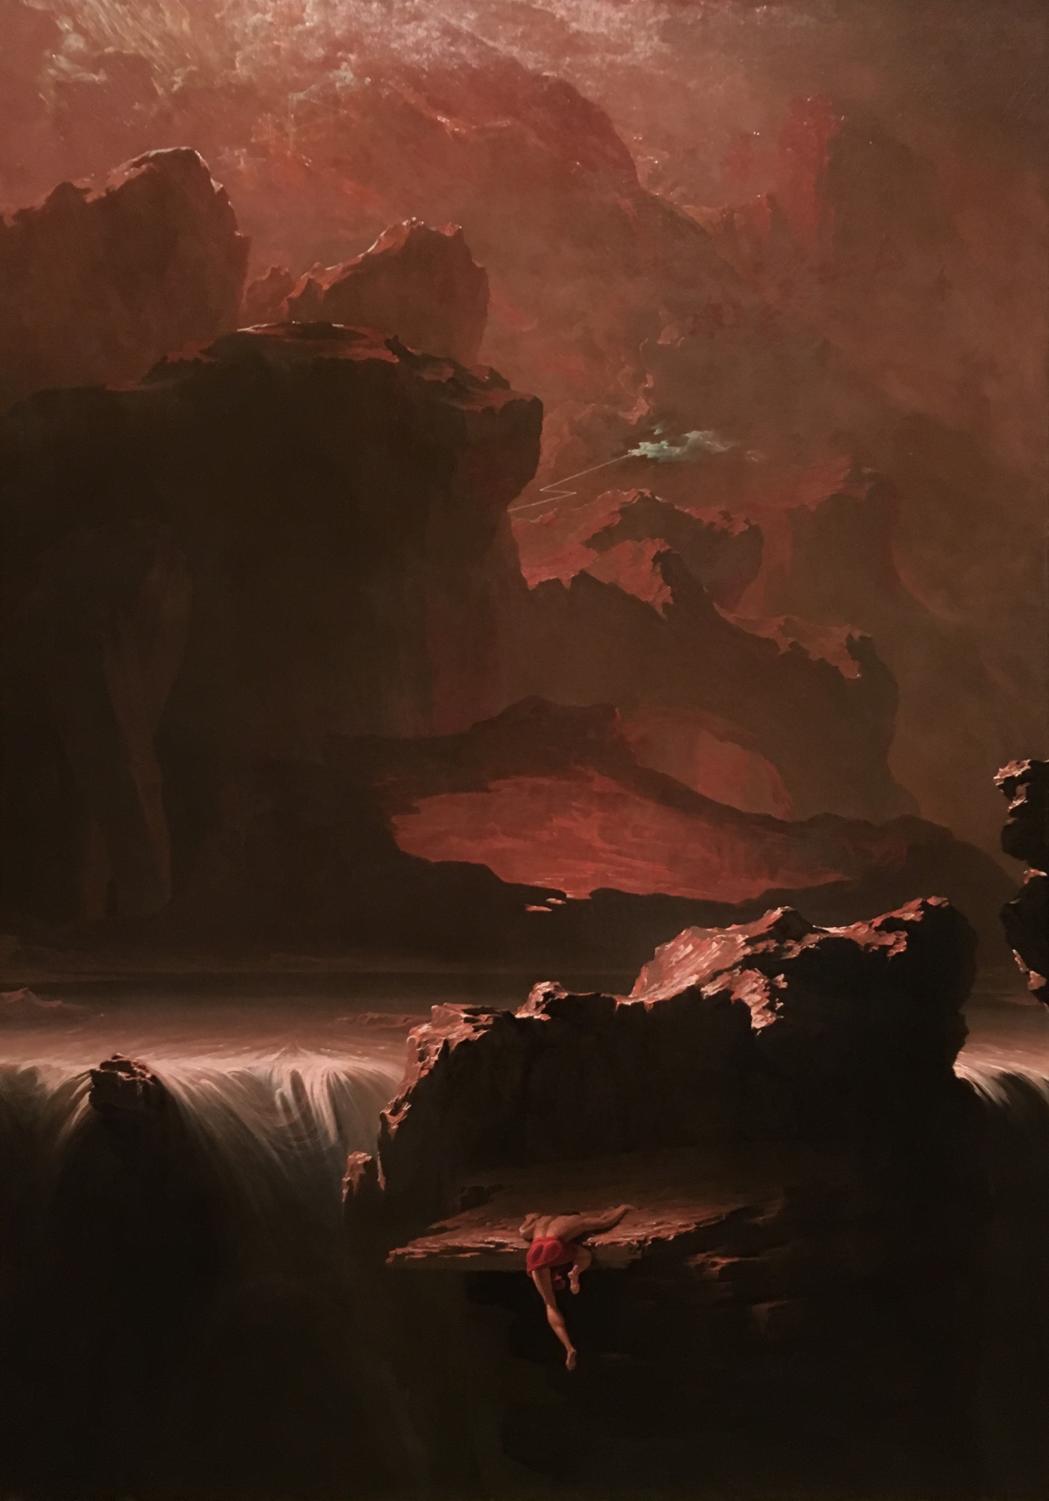 This is “Sadak in Search of the Waters of Oblivion” by John Martin. Definitely not as famous as something like the “Last Supper” but it’s still one of my favorite paintings.